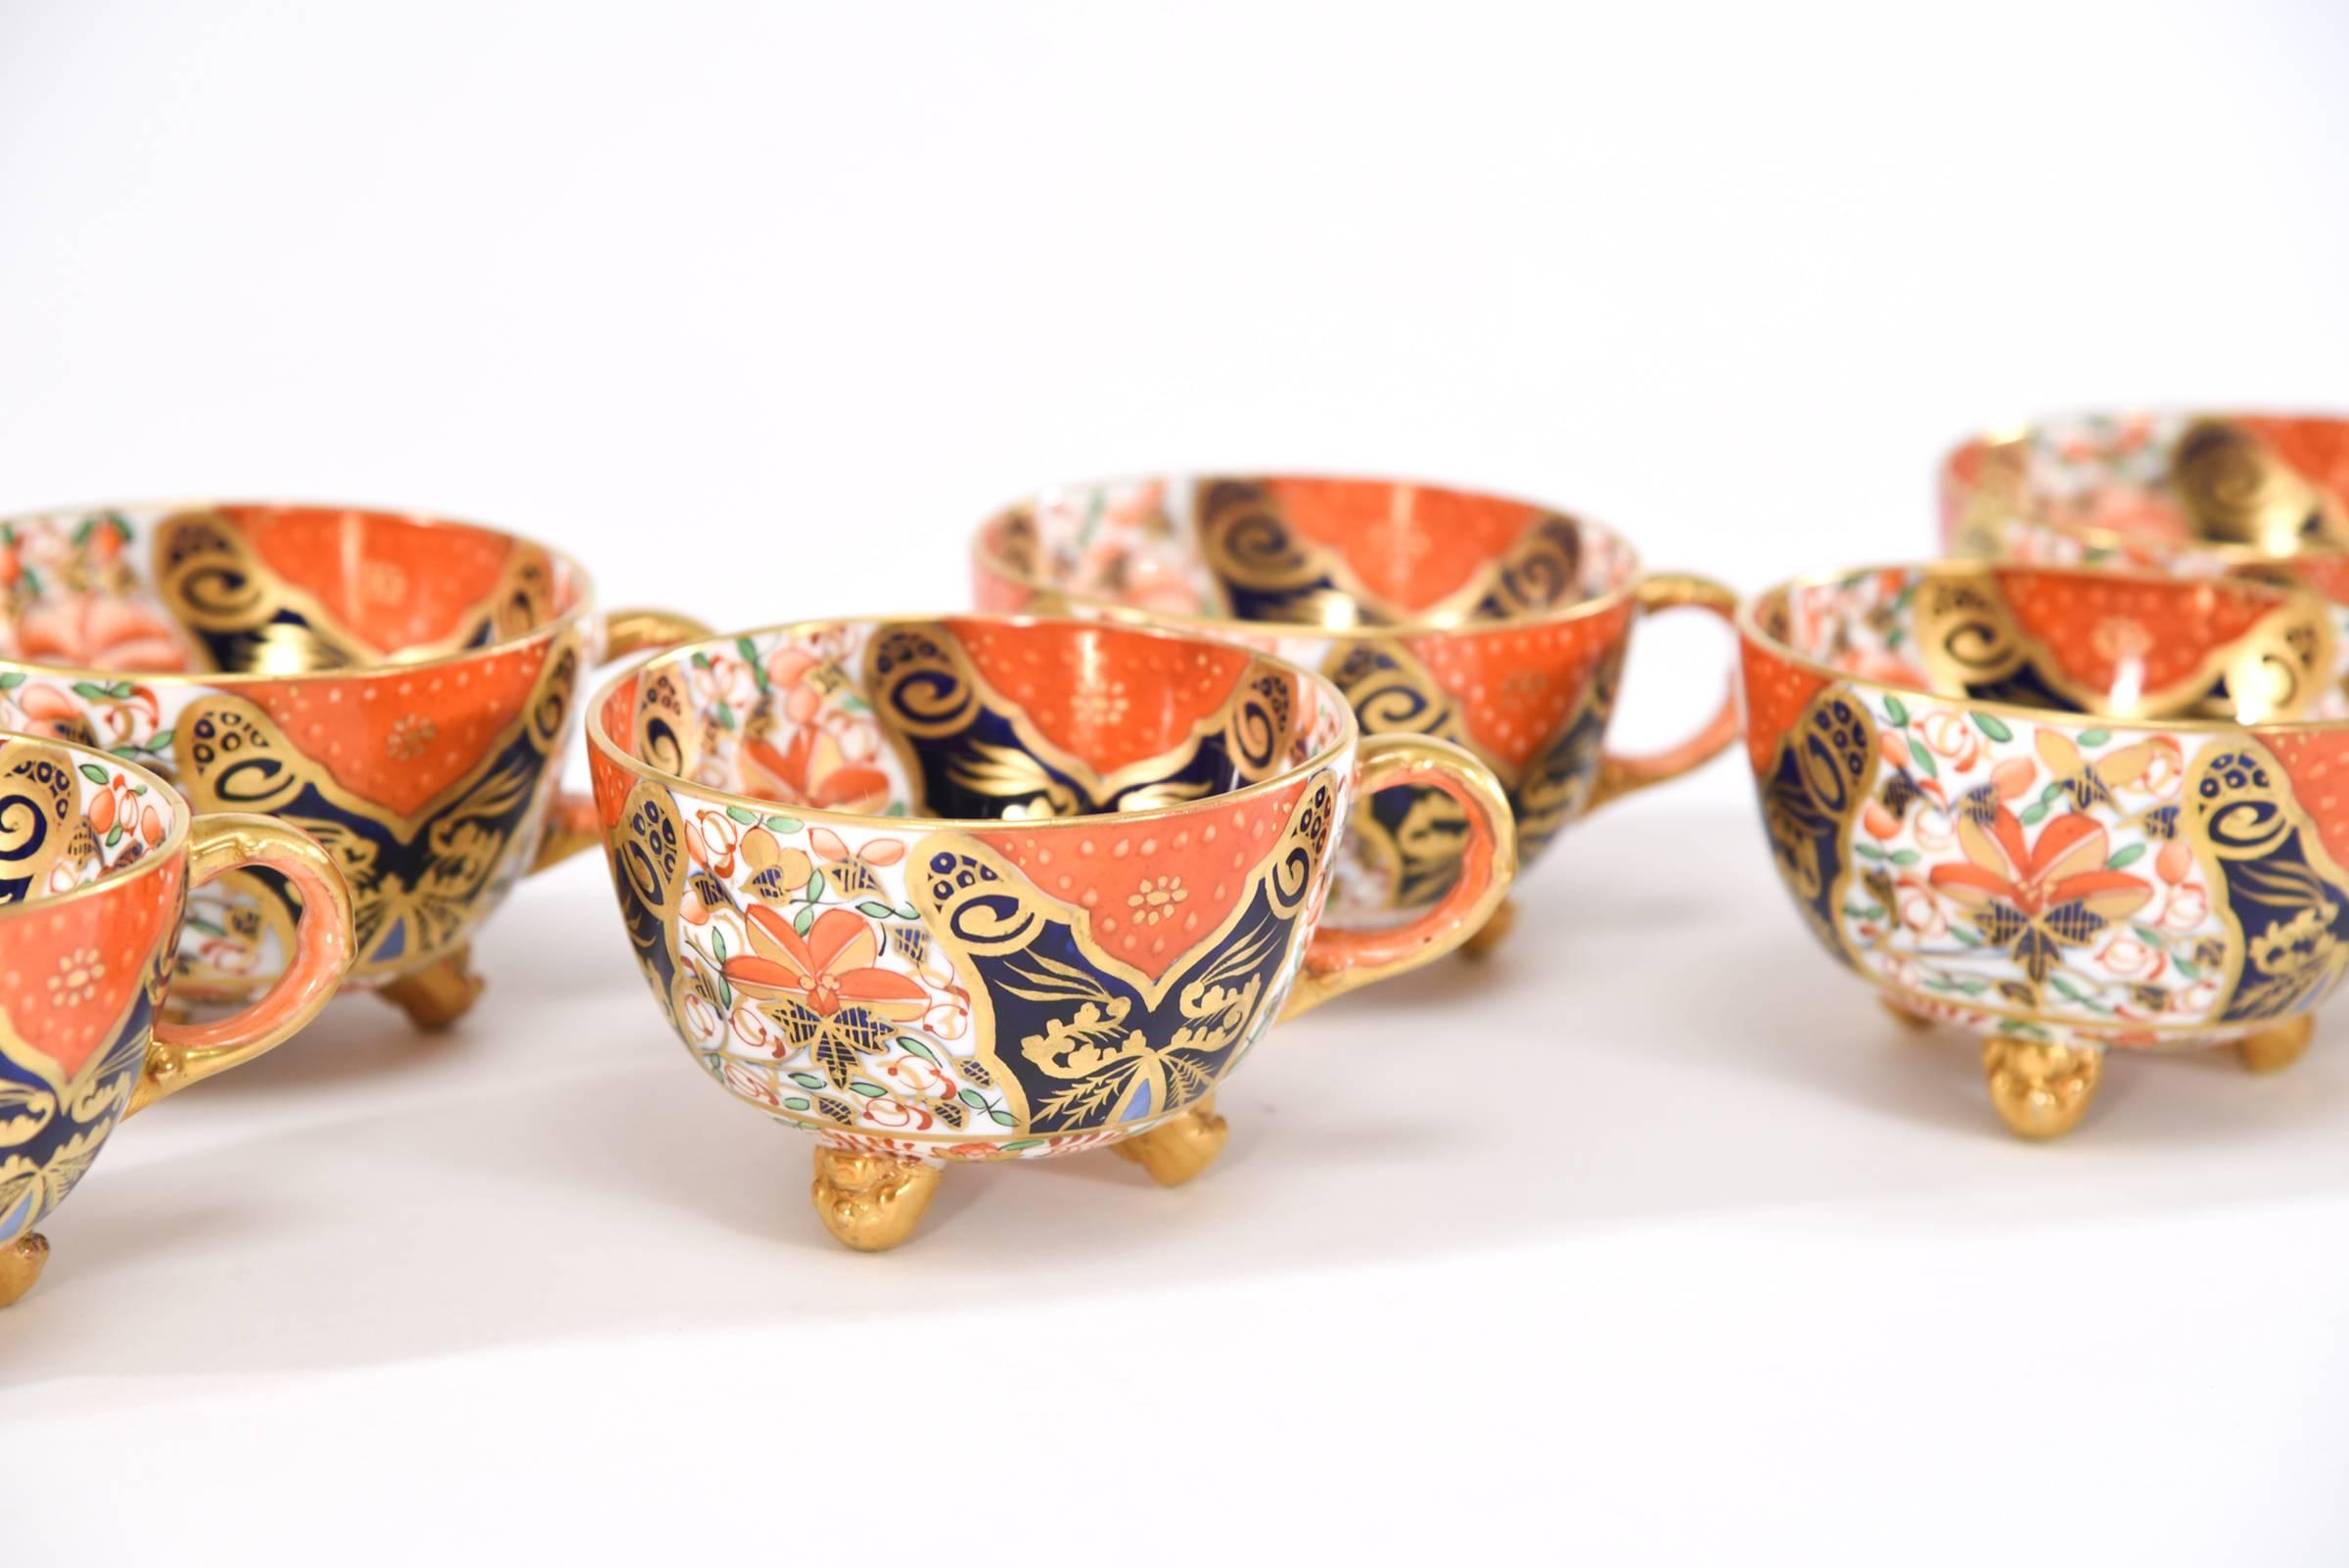 An amazing hand painted example of the influence of the Japonesque influence on English wares ca. 1890's. This is a complete set of 8 footed cups and saucers and 8 matching dessert plates accompanied by a creamer and sugar/waste bowl set. The